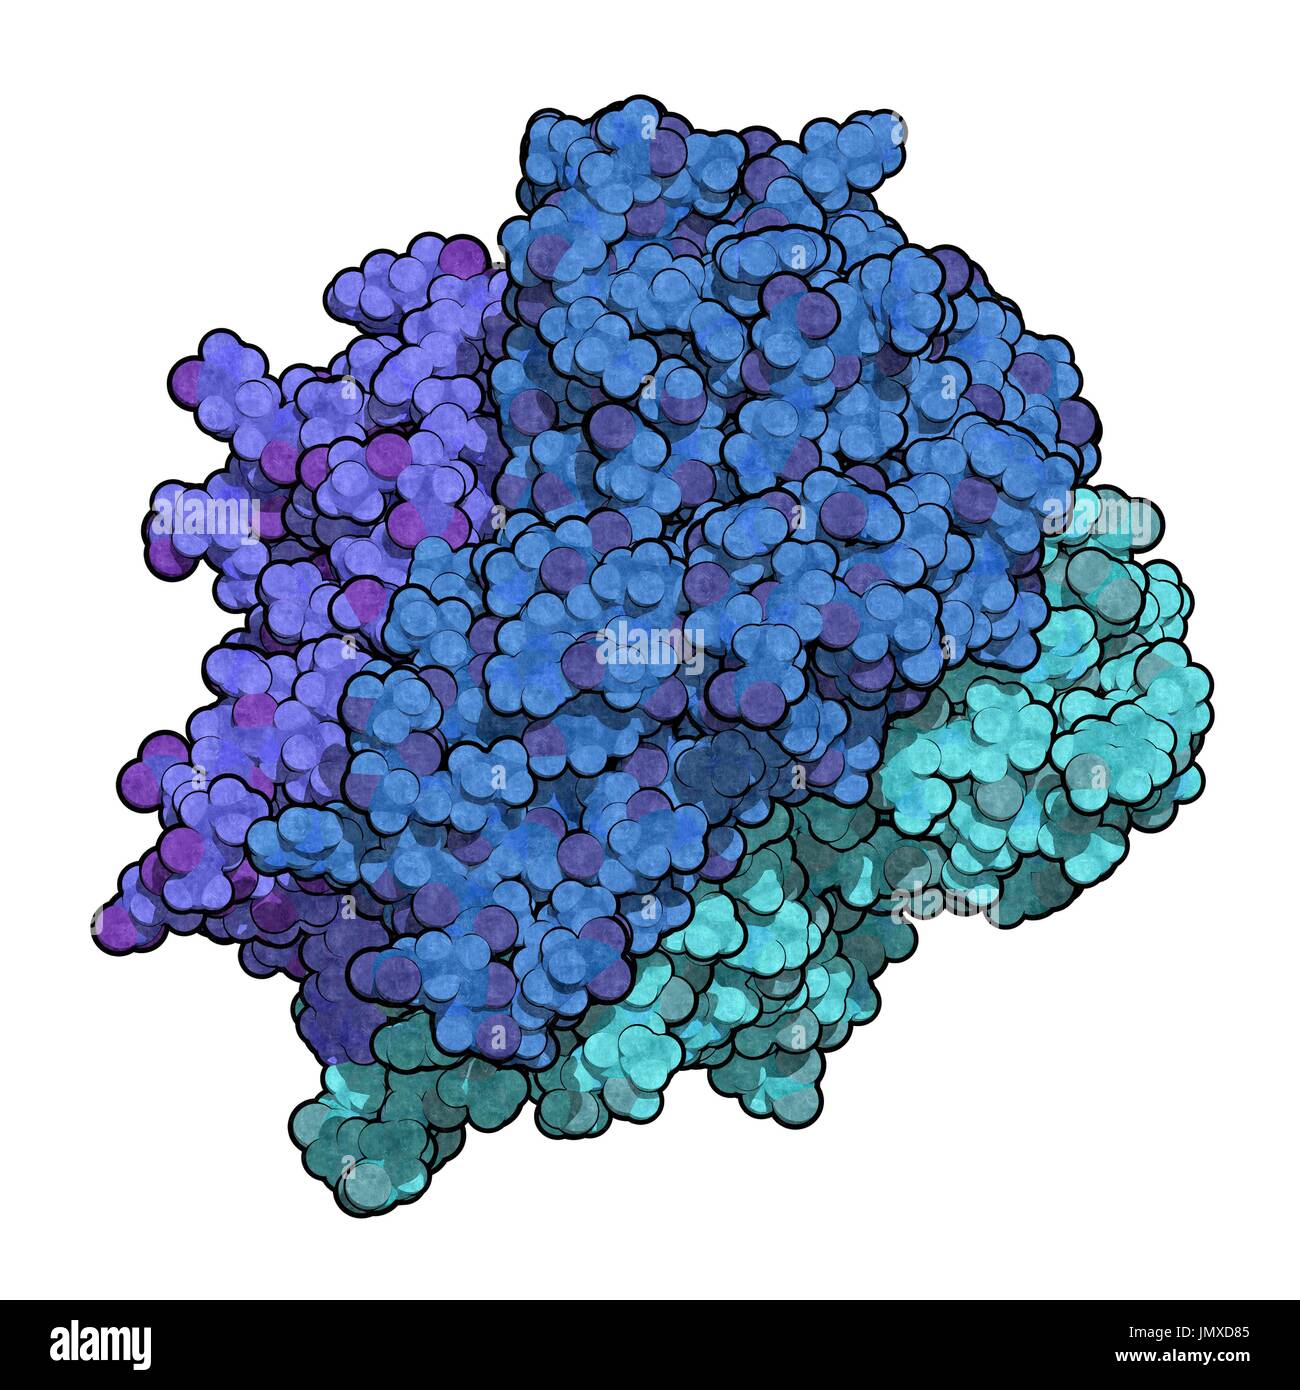 Tumour necrosis factor alpha (TNF) cytokine protein molecule. Clinically used inhibitors include infliximab, adalimumab, certolizumab and etanercept and are used to treat diseases such as Crohn's disease, psoriasis and rheumatoid arthritis. Space-filling model. Chains (monomers of the trimer) shown in different colours. Stock Photo